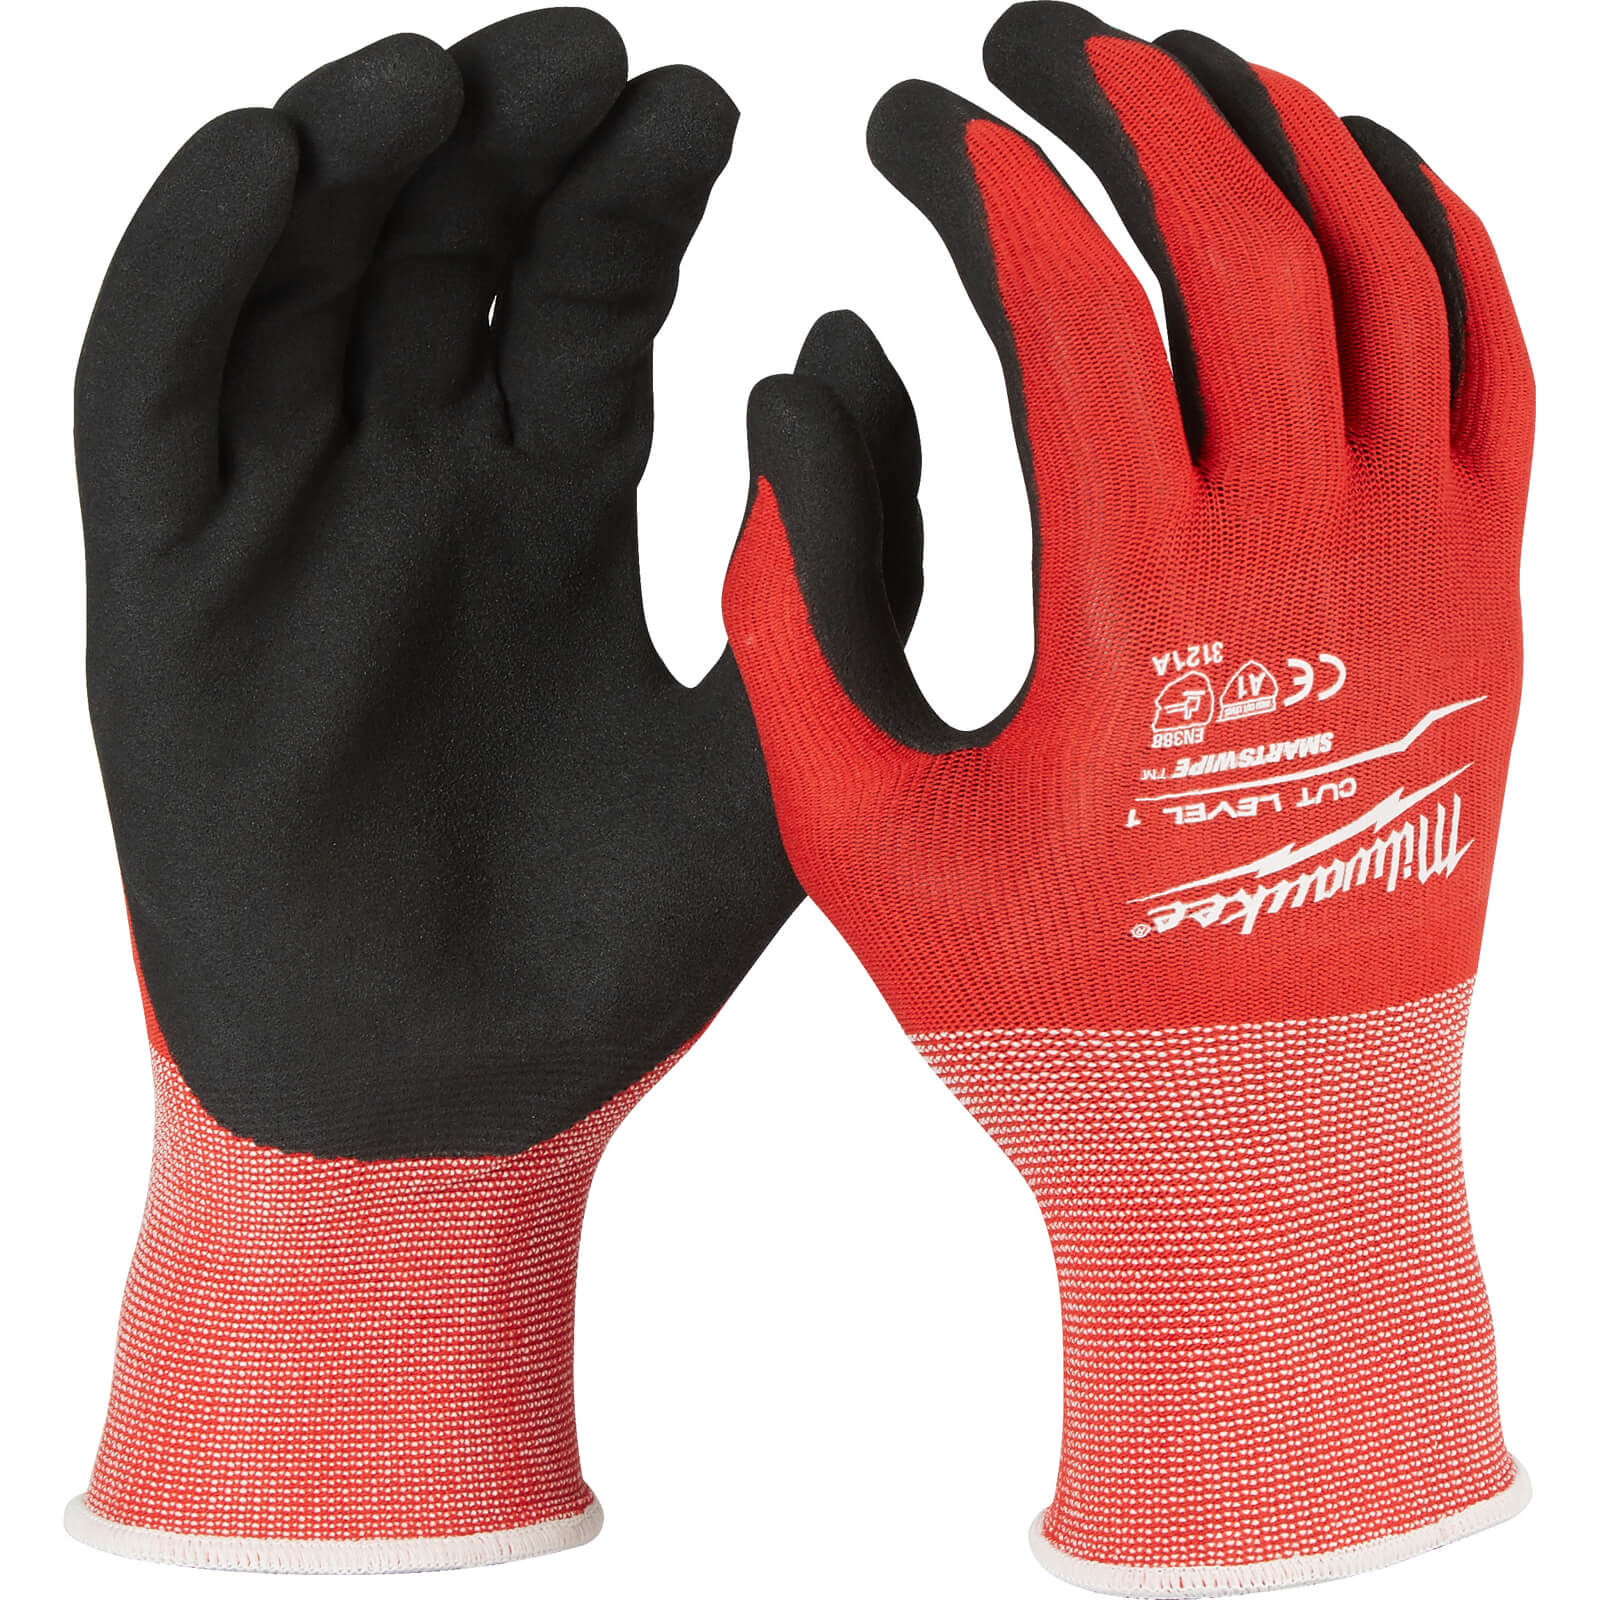 Image of Milwaukee Cut Level 1 Dipped Work Gloves Black / Red 2XL Pack of 1